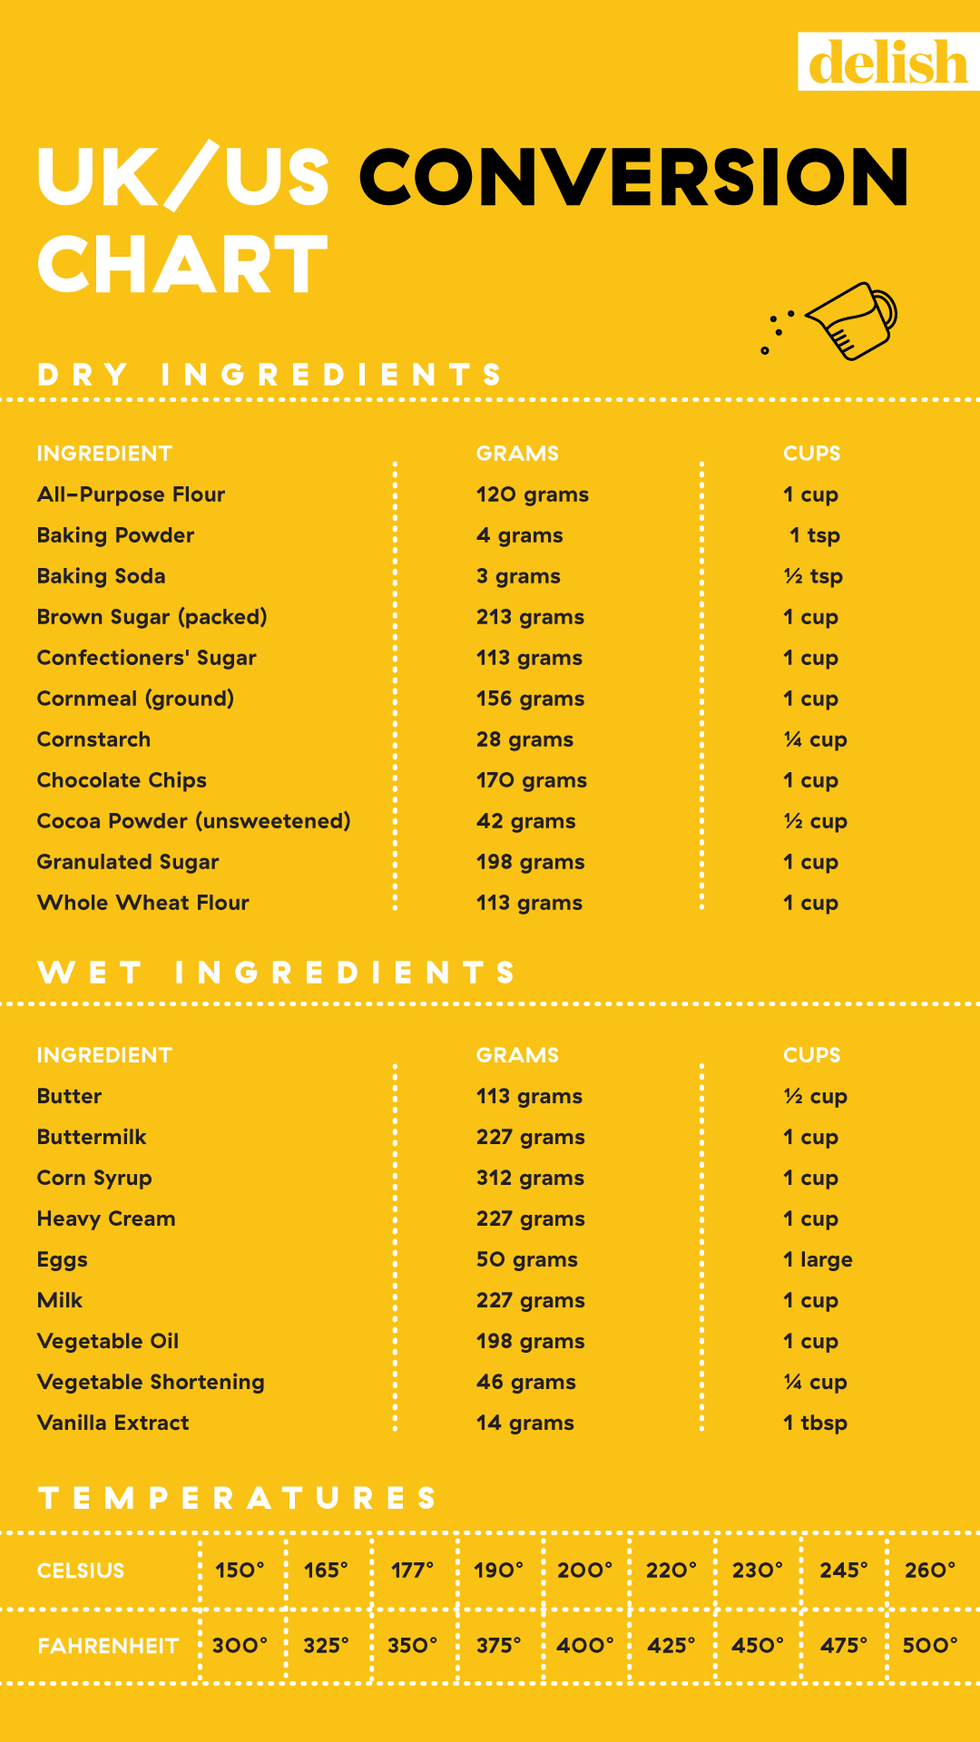 USA and UK unit conversion chart for cooking